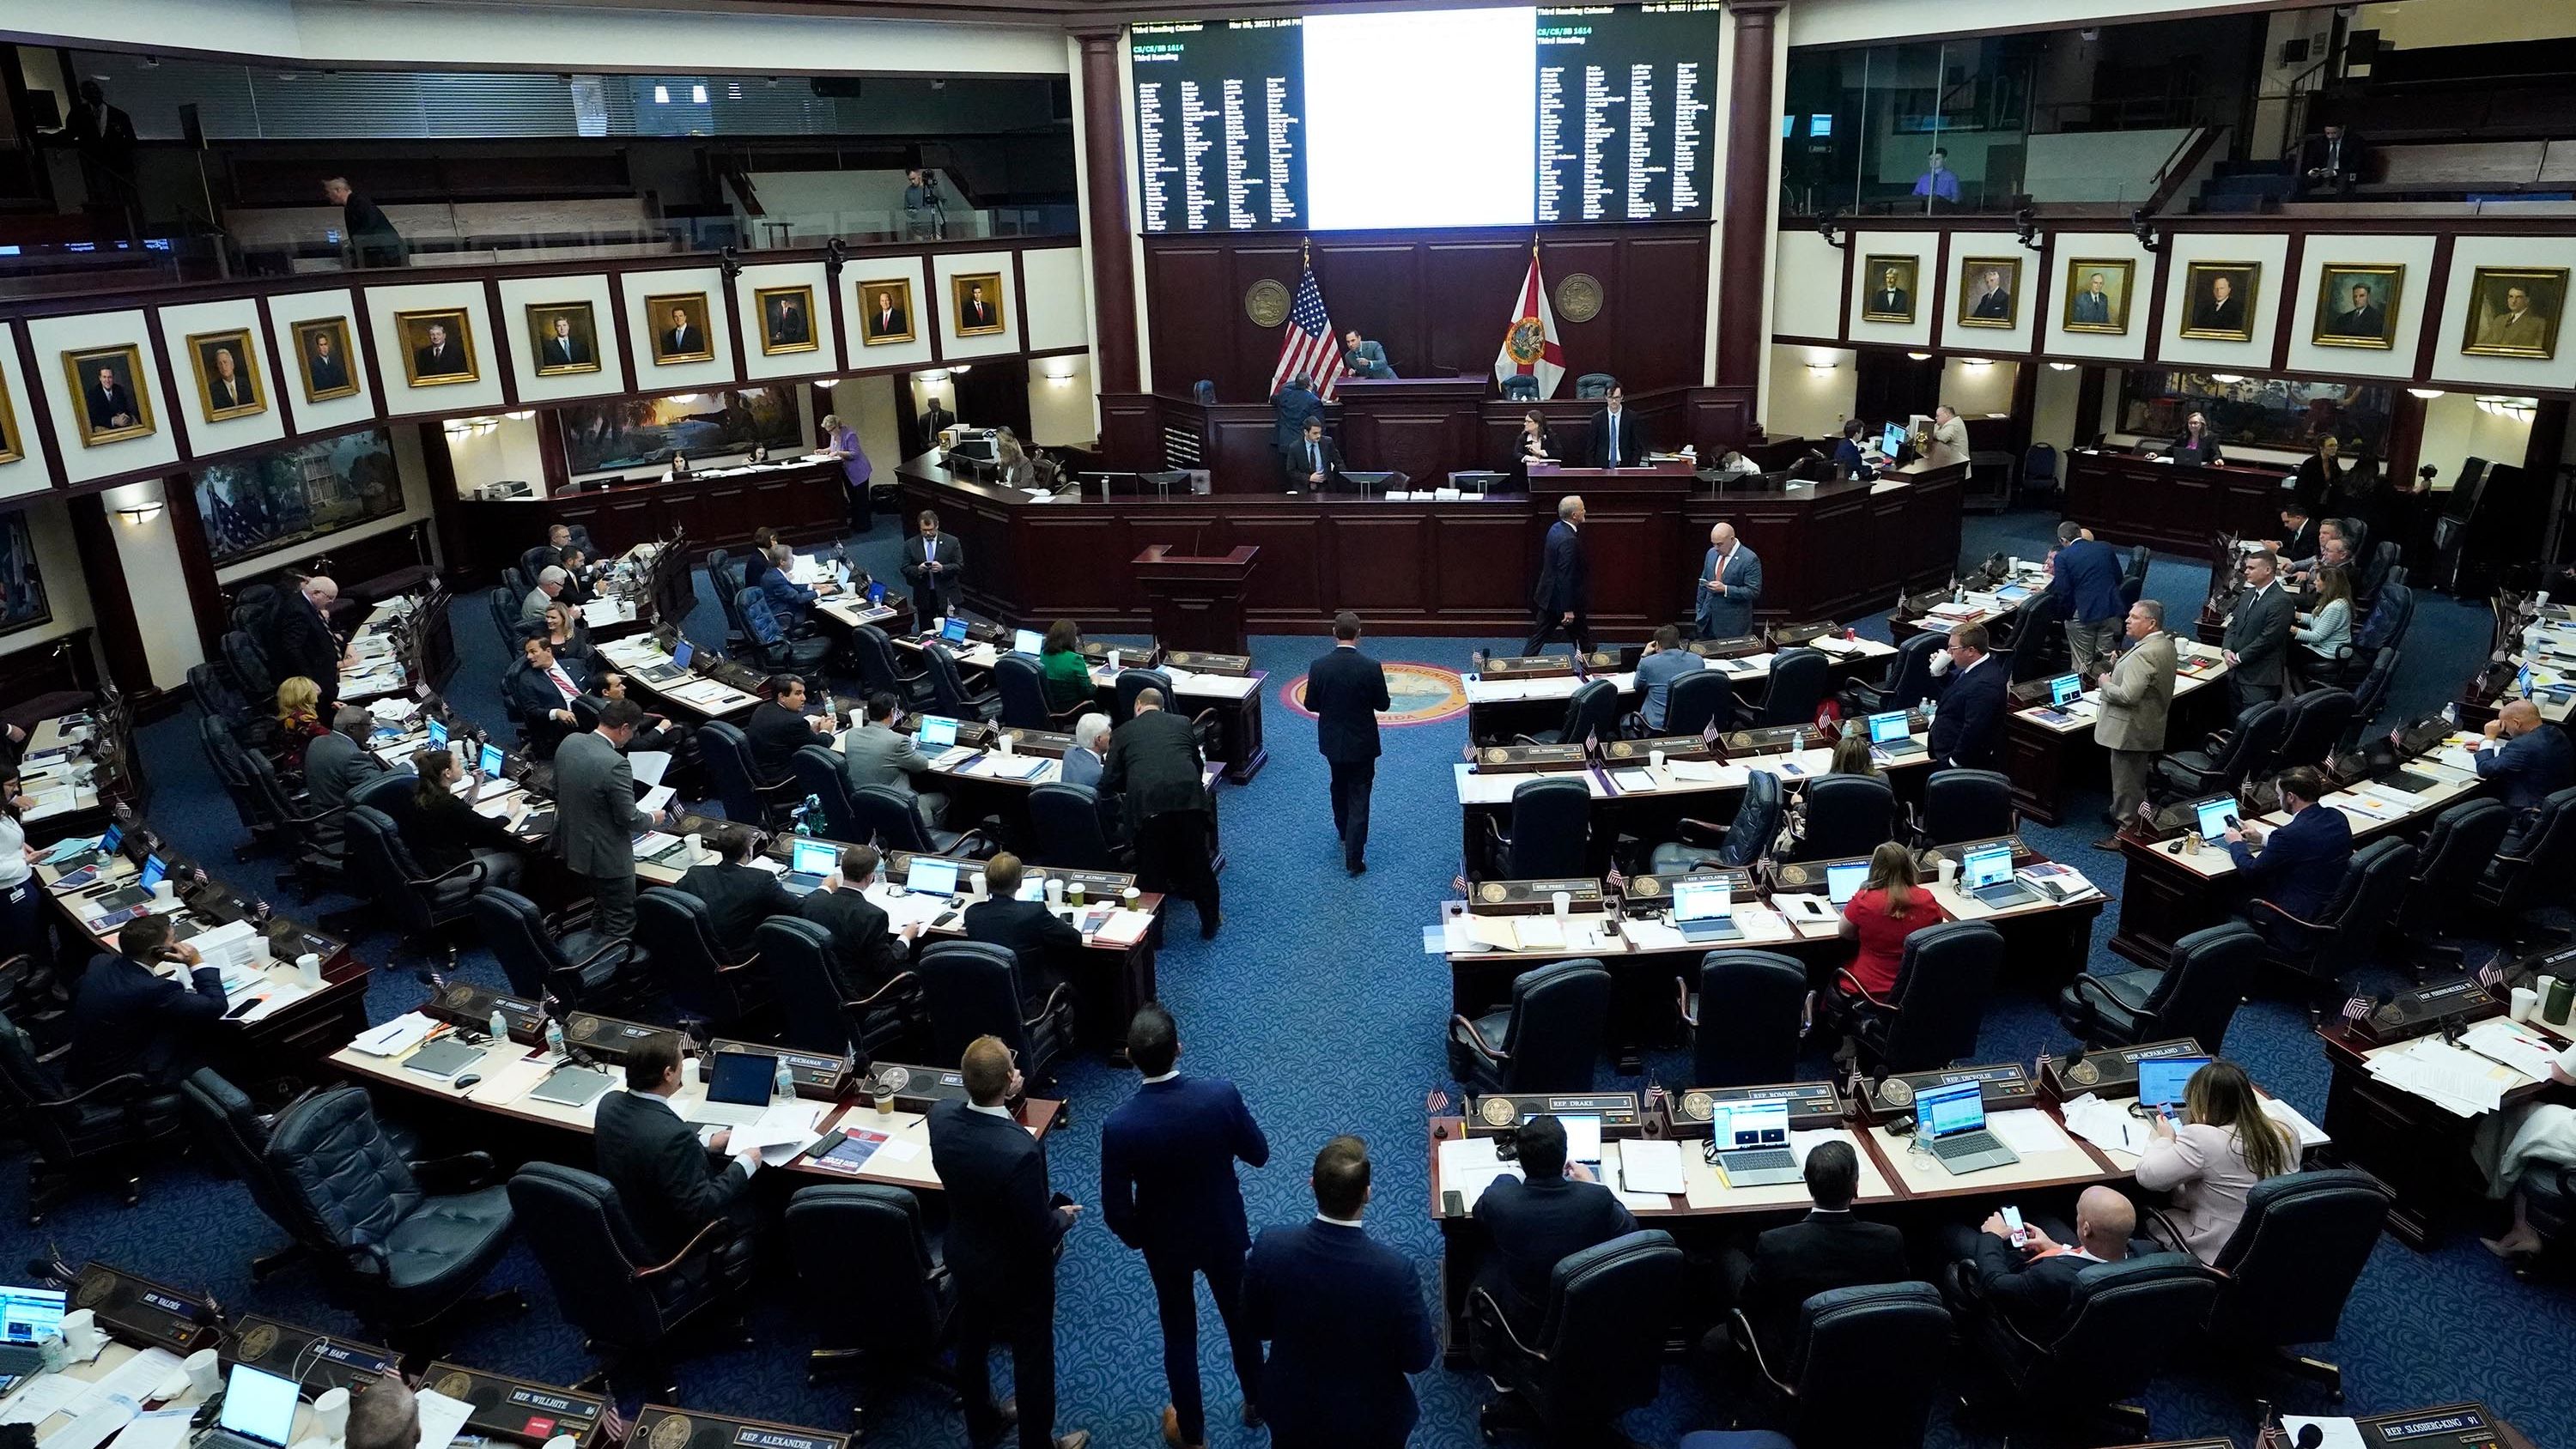 Florida state representatives work in the House during a legislative session at the state Capitol in Tallahassee, Florida, on March 8, 2022.